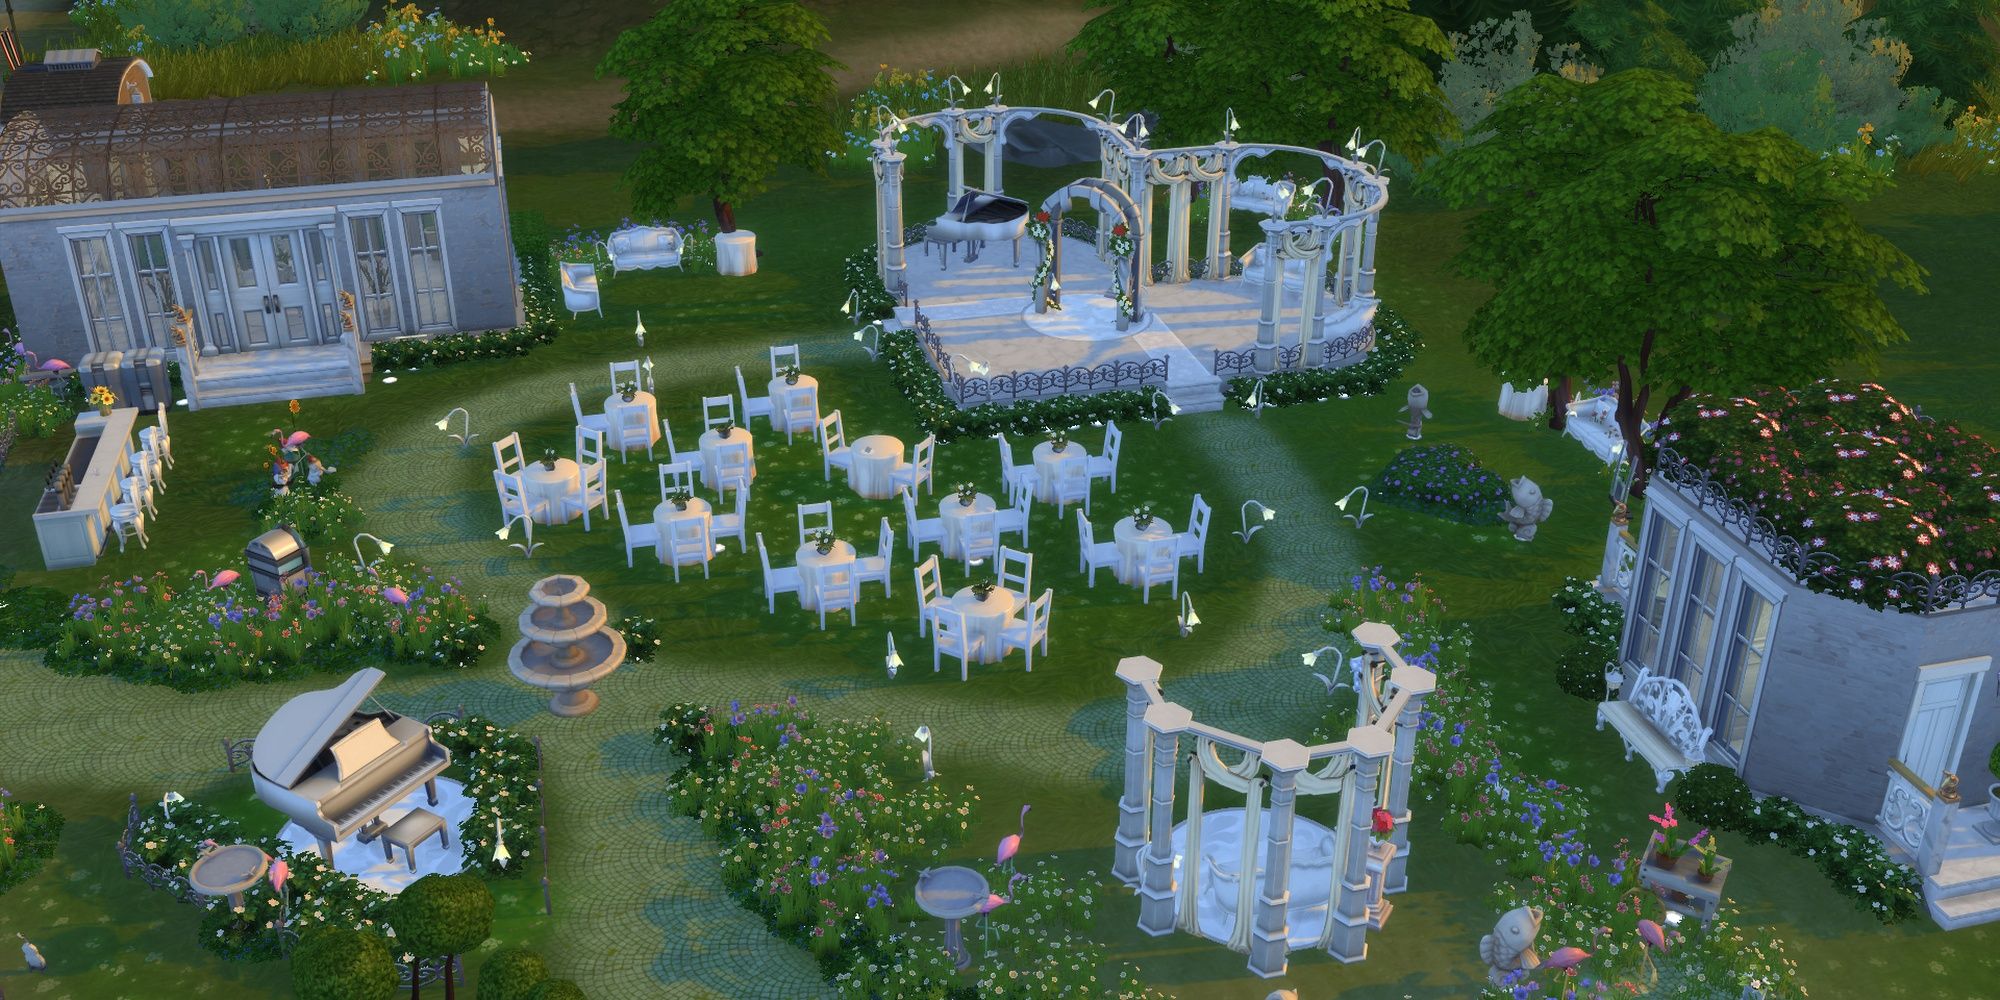 An outdoor wedding venue in The Sims 4 with heart shaped altars and paths.